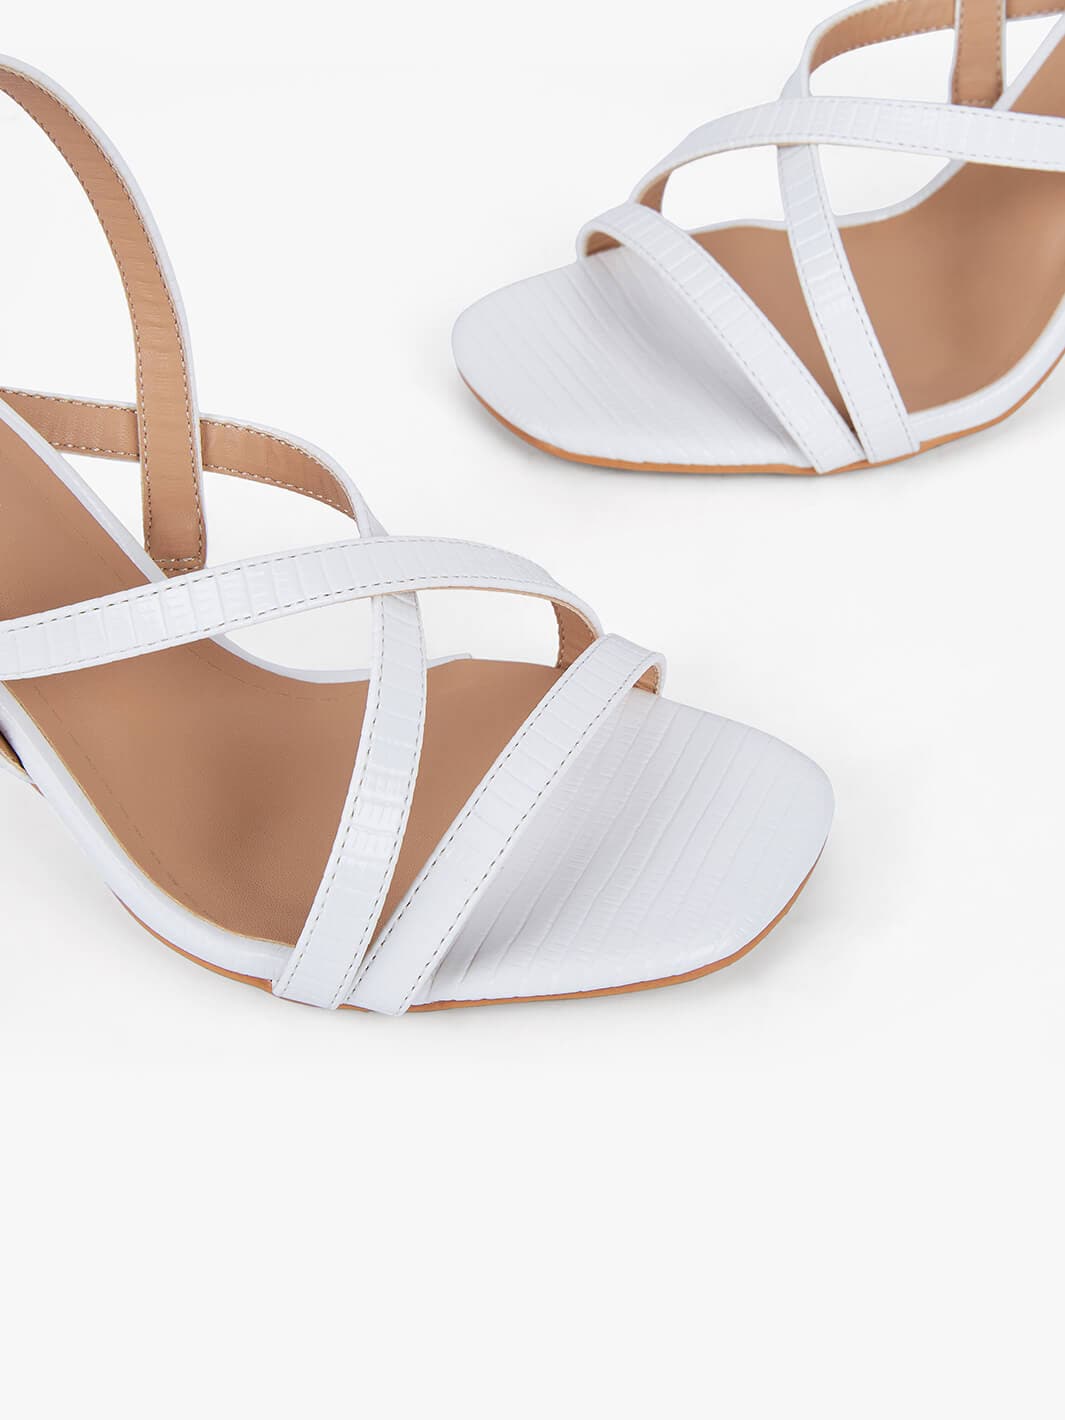 Strappy Heeled Sandals